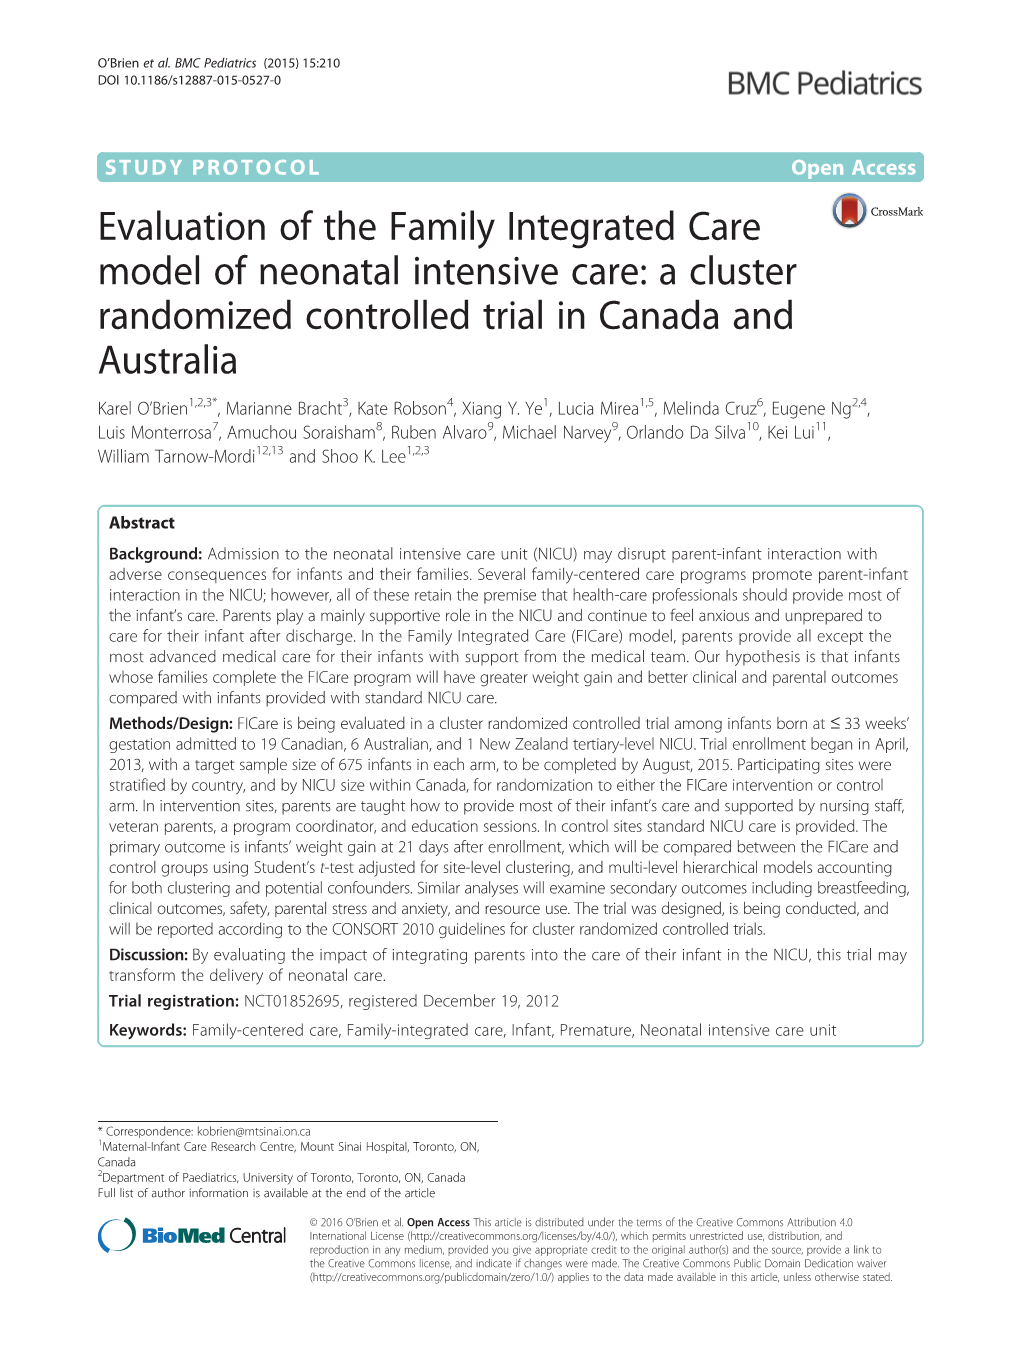 Evaluation of the Family Integrated Care Model of Neonatal